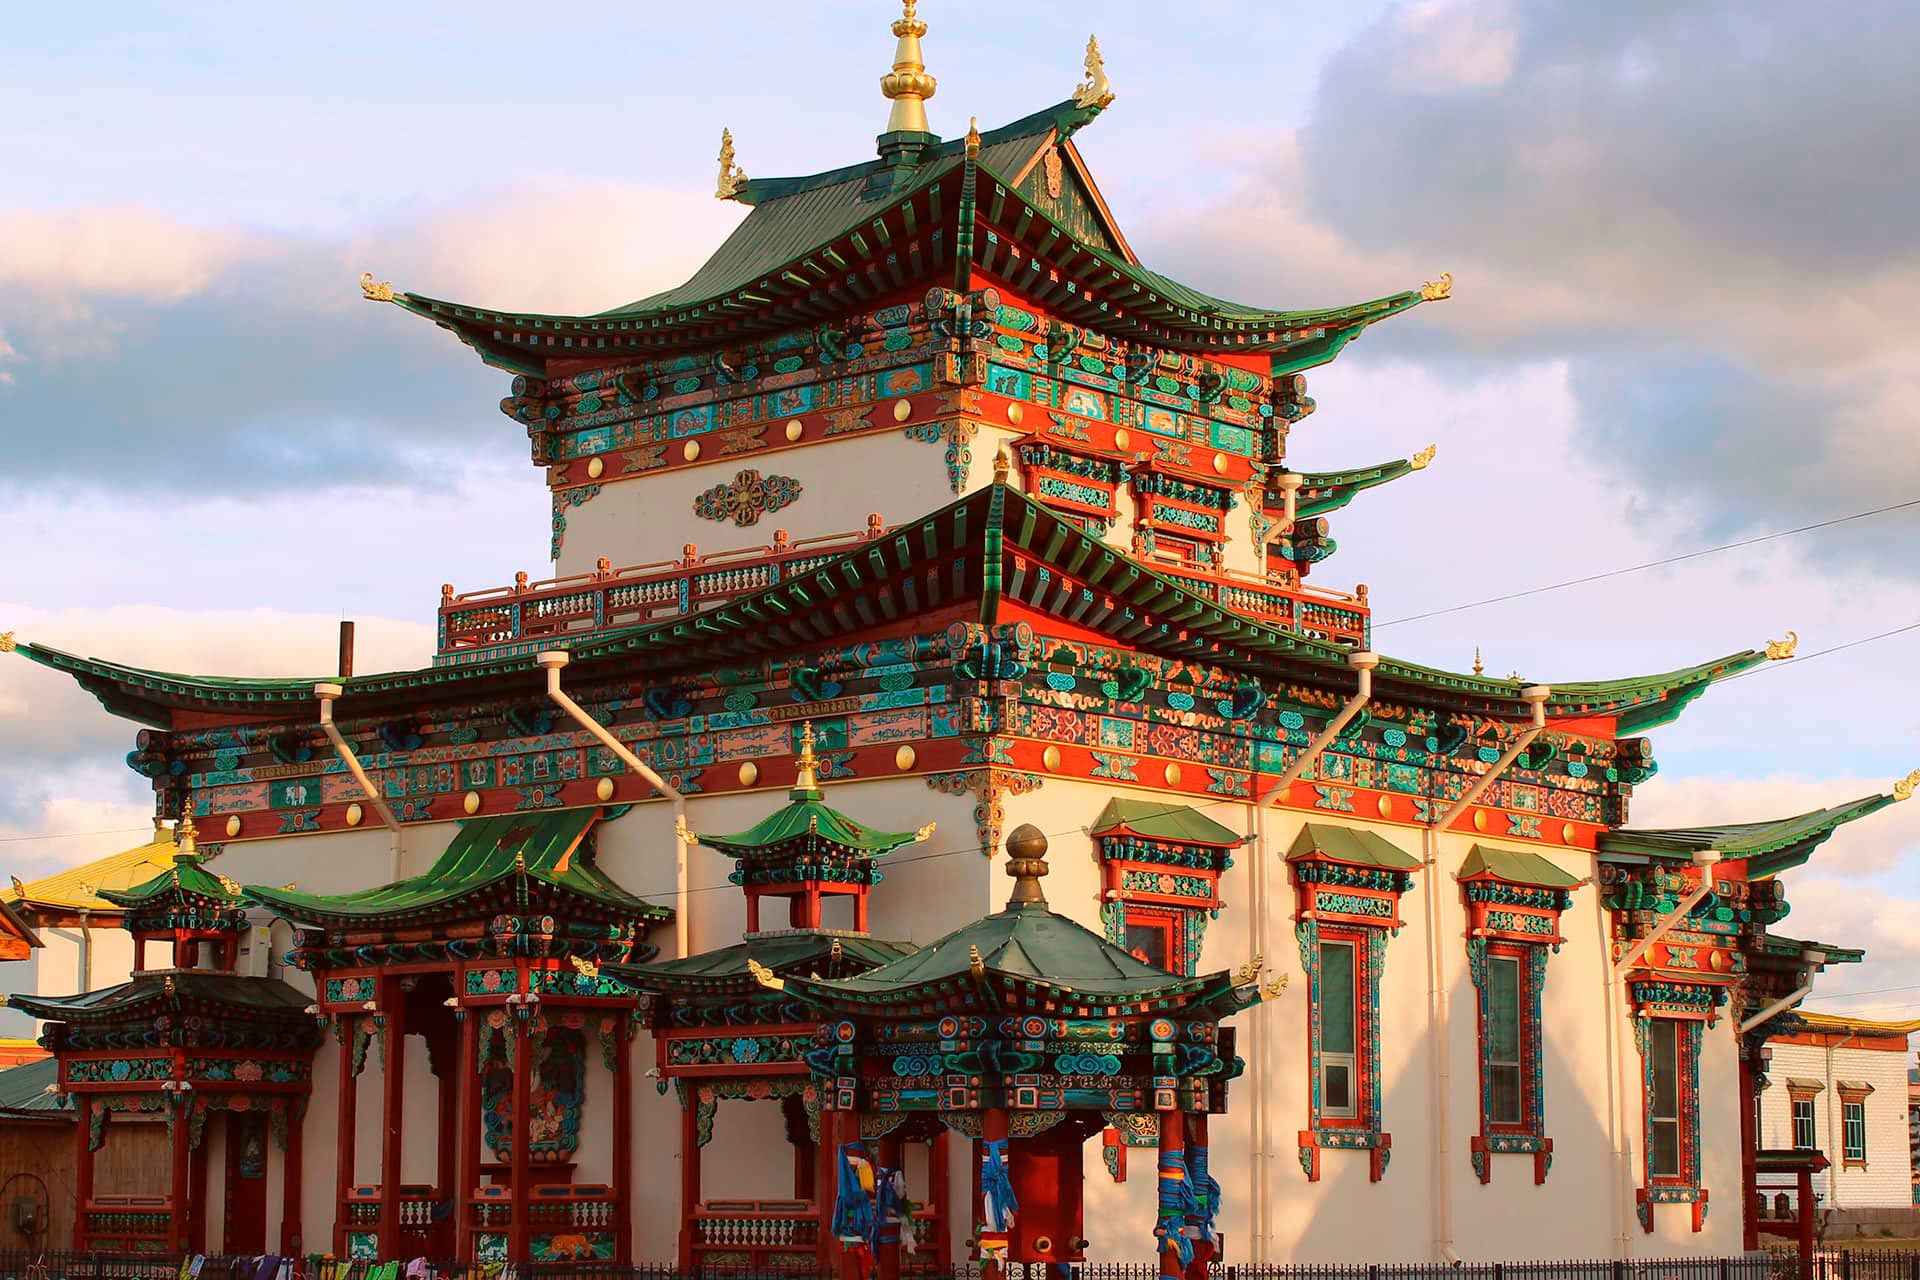 A colorful Buddhist Temple with green roof and orange decorations